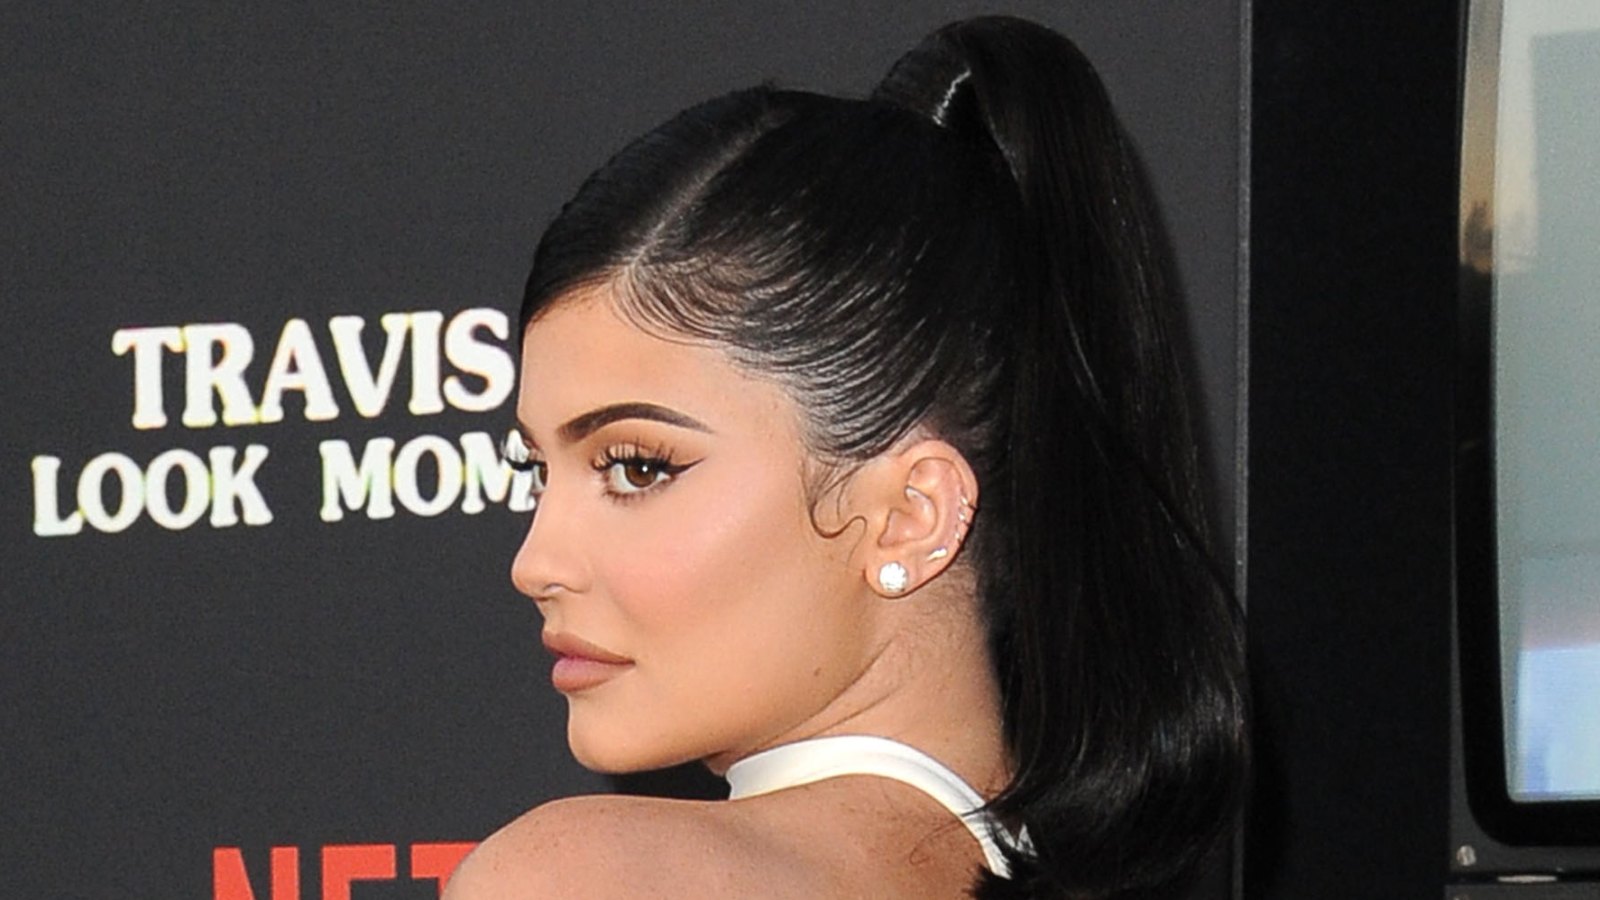 Kylie Jenner at the Travis Scott "Look Mom I Can Fly LA" Premiere on August 27, 2019.